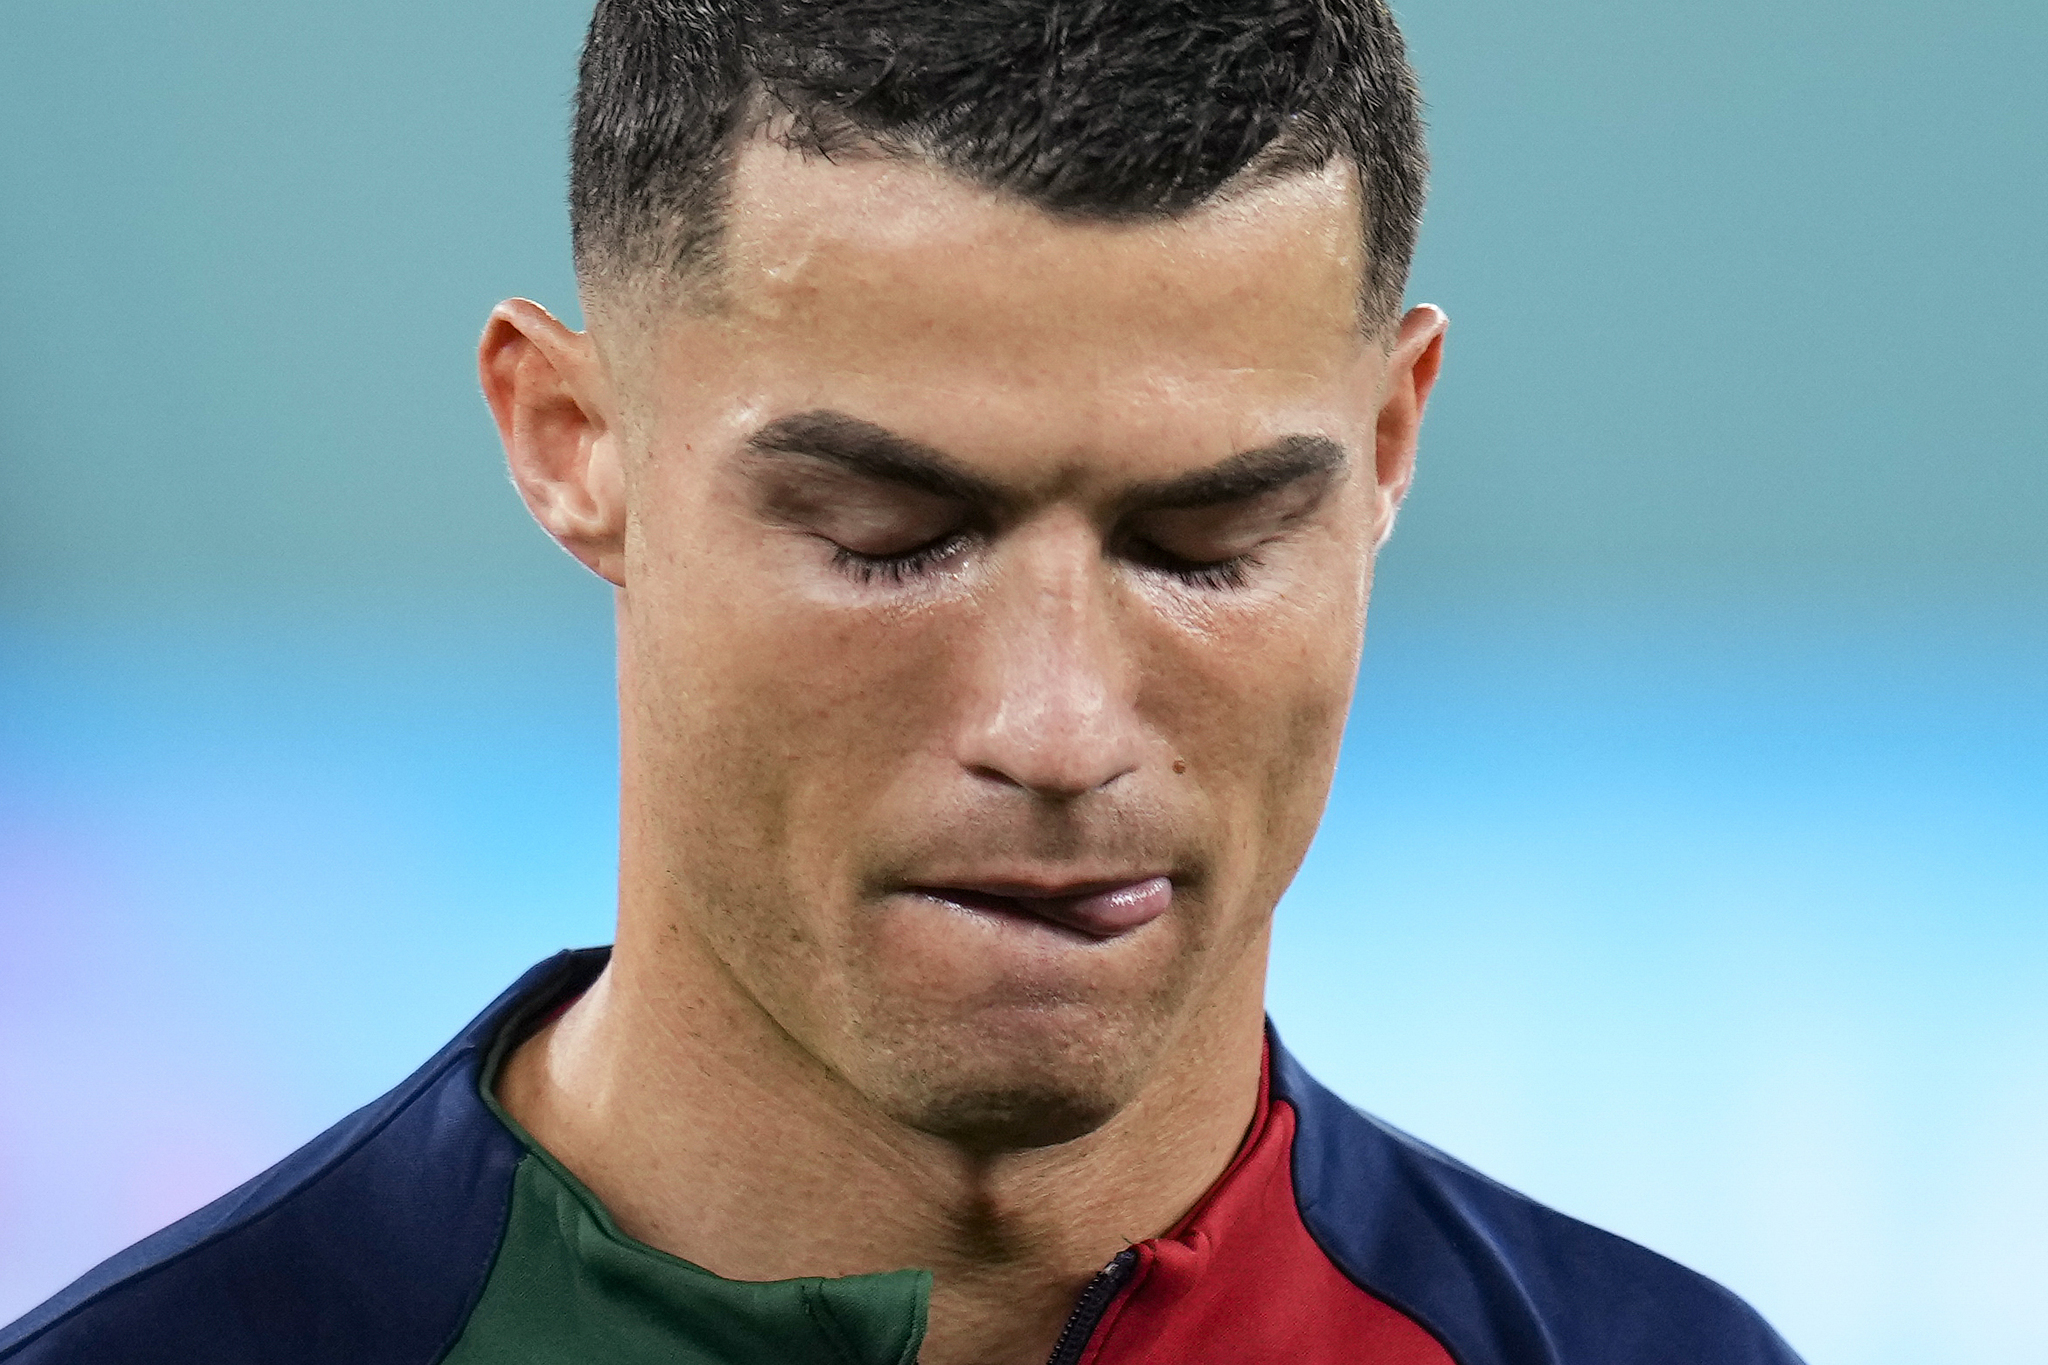 Portugal's  lt;HIT gt;Cristiano lt;/HIT gt;  lt;HIT gt;Ronaldo lt;/HIT gt; reacts while listening to the Portugal's national anthem prior the start of the World Cup group H soccer match between Portugal and Ghana at the Stadium 974 in Doha, Qatar, Thursday, Nov. 24, 2022. (AP Photo/Manu Fernandez)